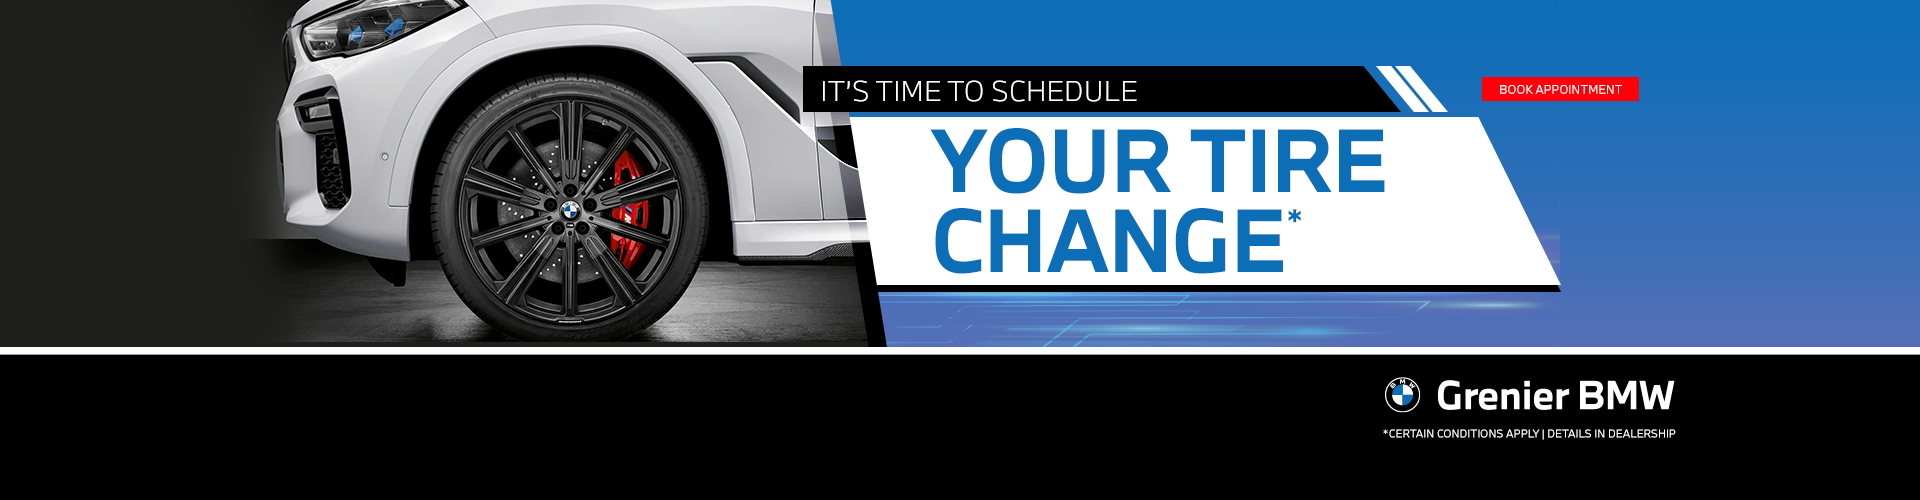 IT'S TIME TO PLAN YOUR TIRE CHANGE !